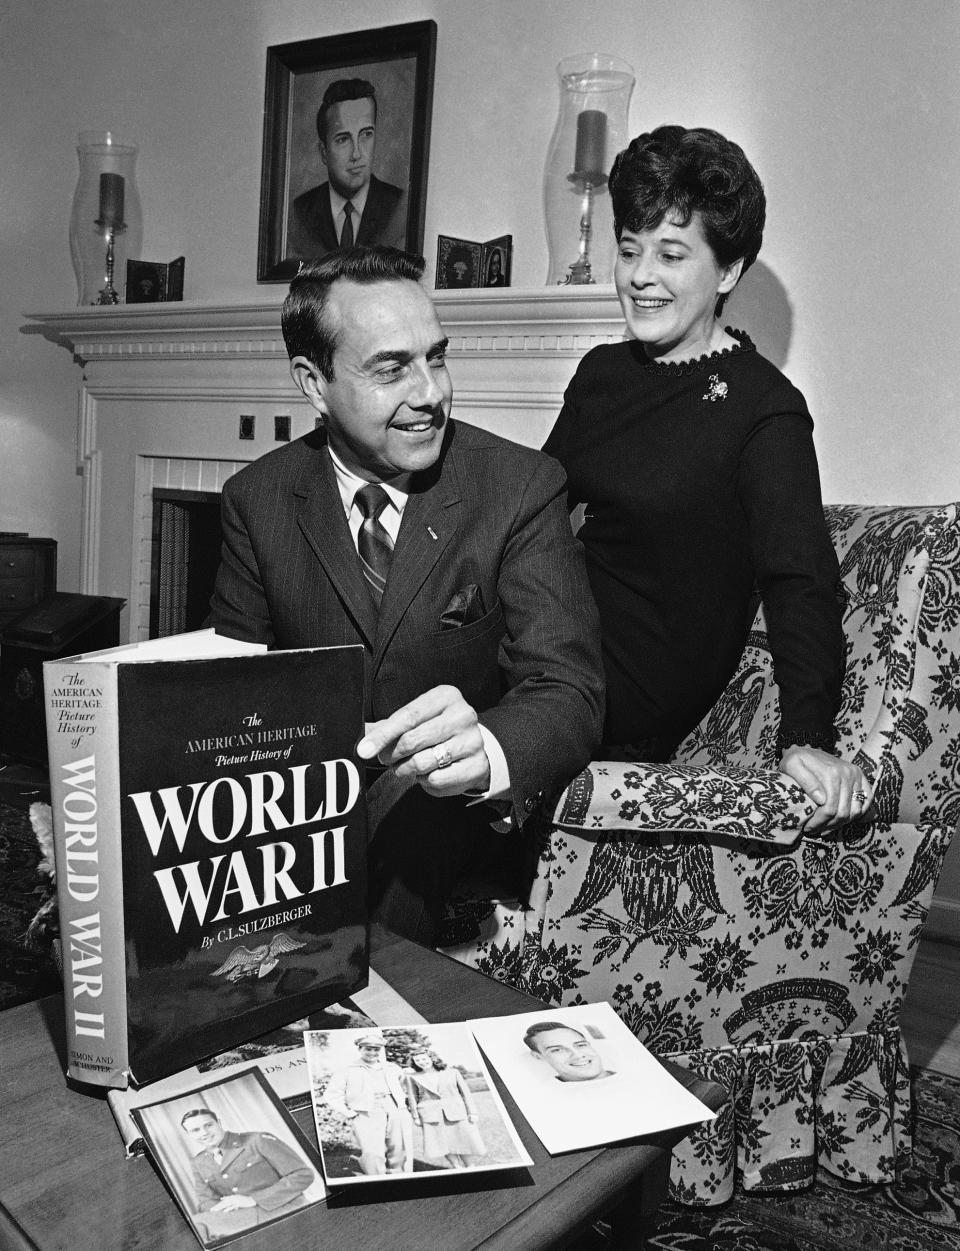 Bob Dole  and his first wife, Phyllis, look at a book about World War II as well as photos of him from his time in the service.